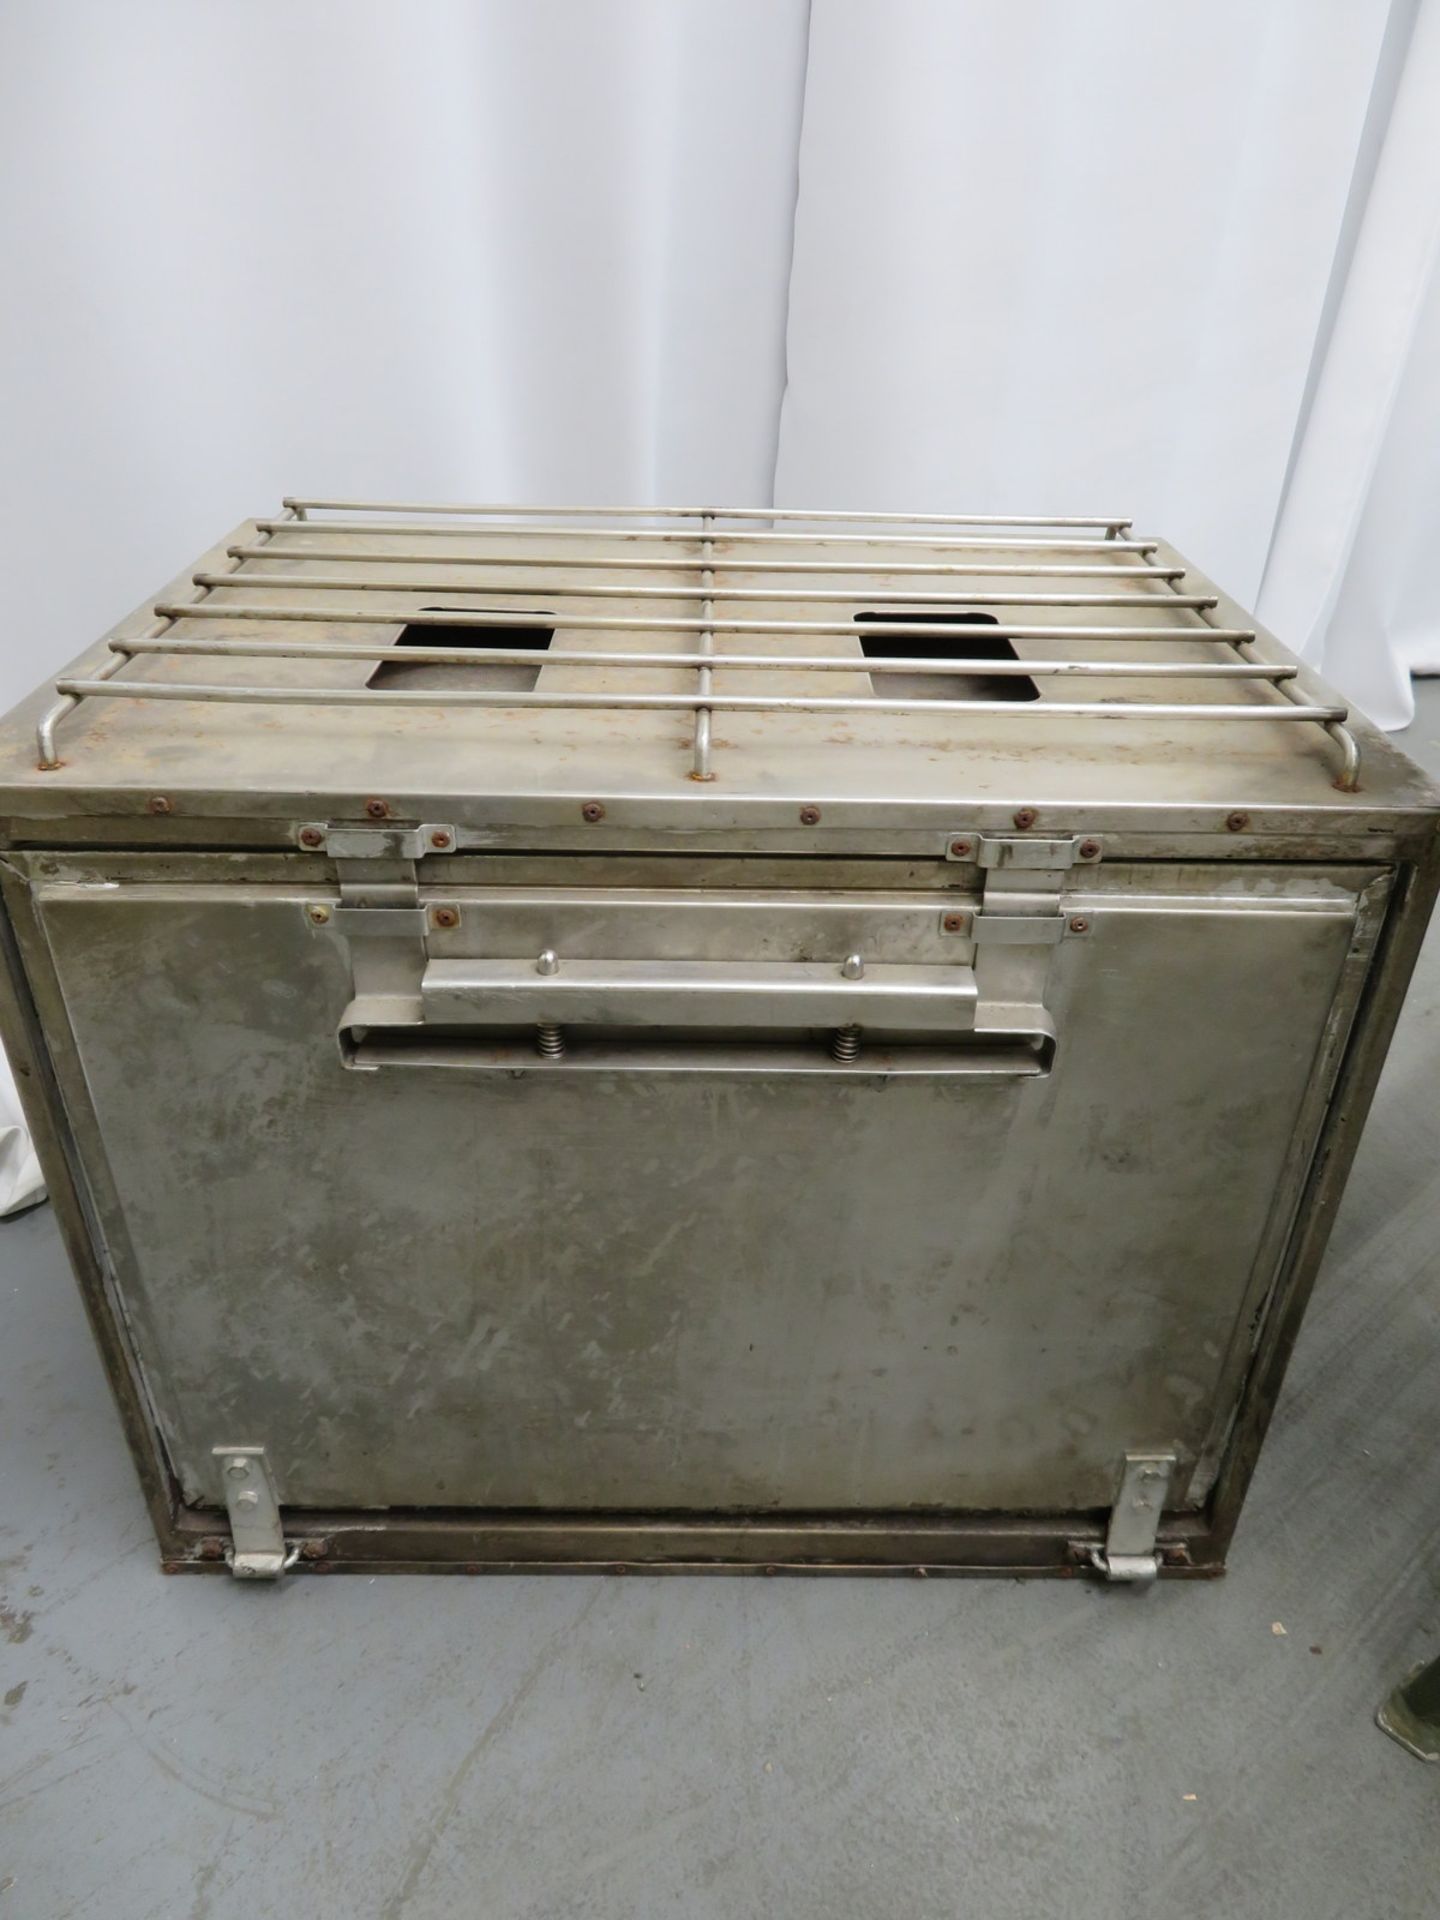 British Army No 5 field cooker & G1 No 5 hot box field oven set. - Image 6 of 16